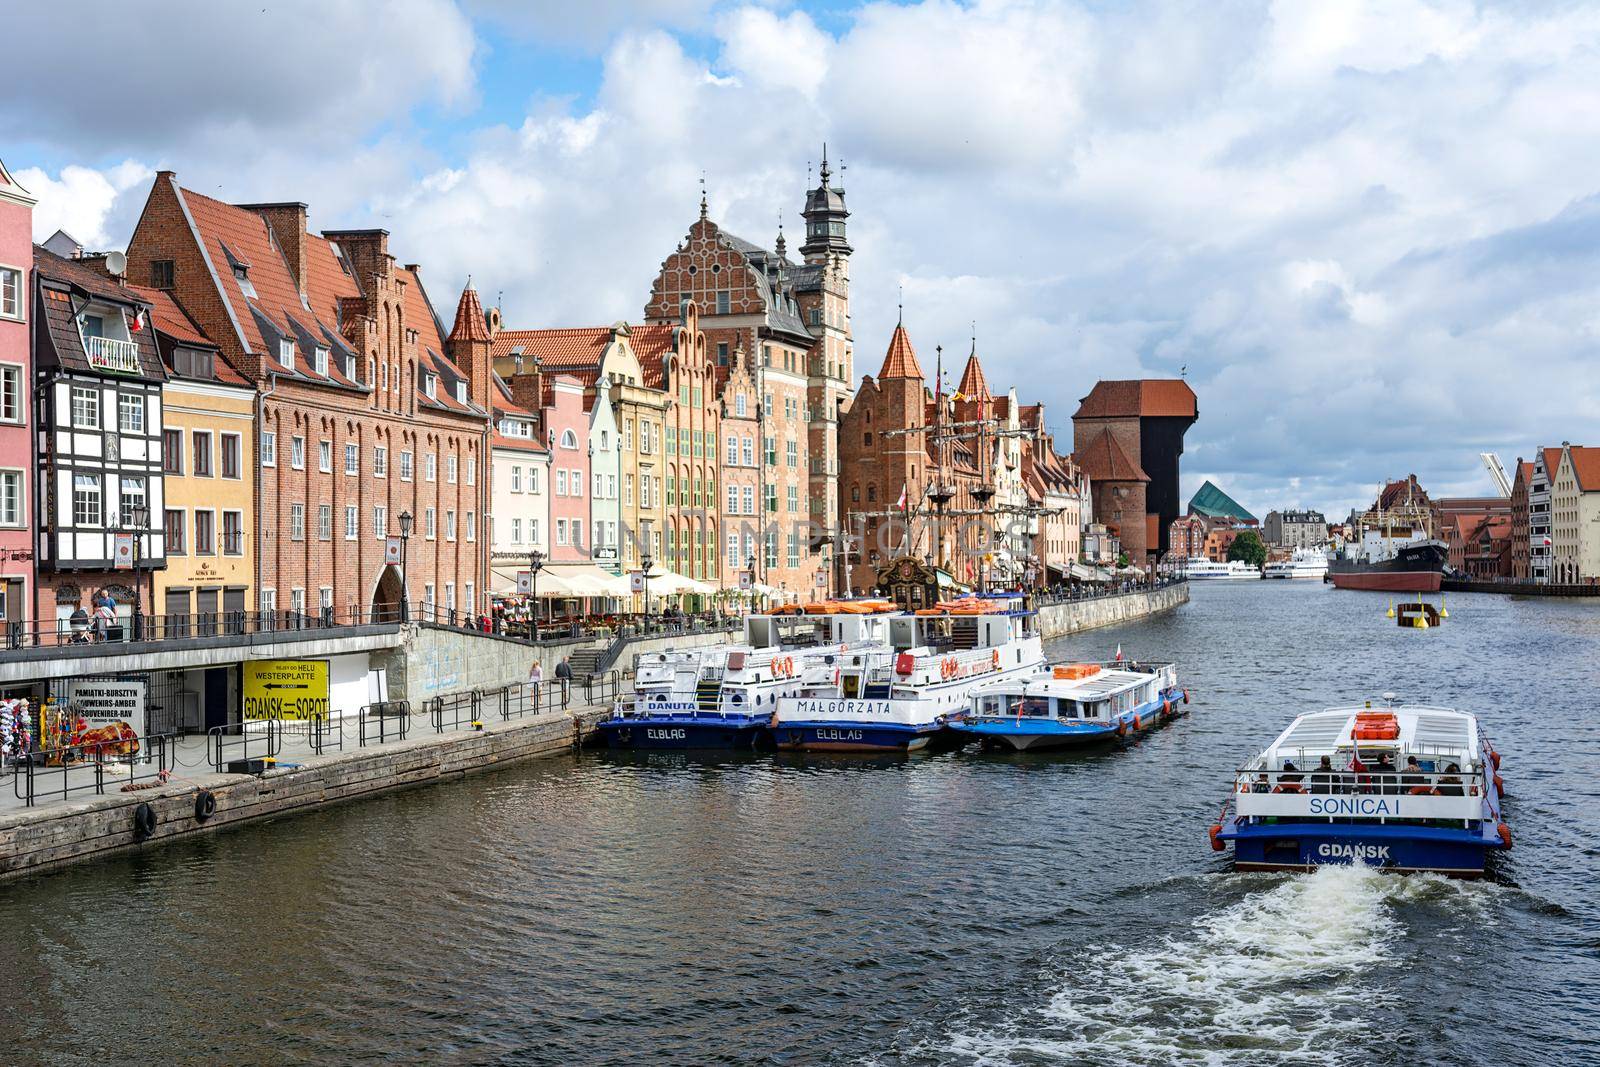 Gdansk, Poland - June 26, 2018: Tourist cruise ship on Motlawa river in historical Old Town of Gdansk City